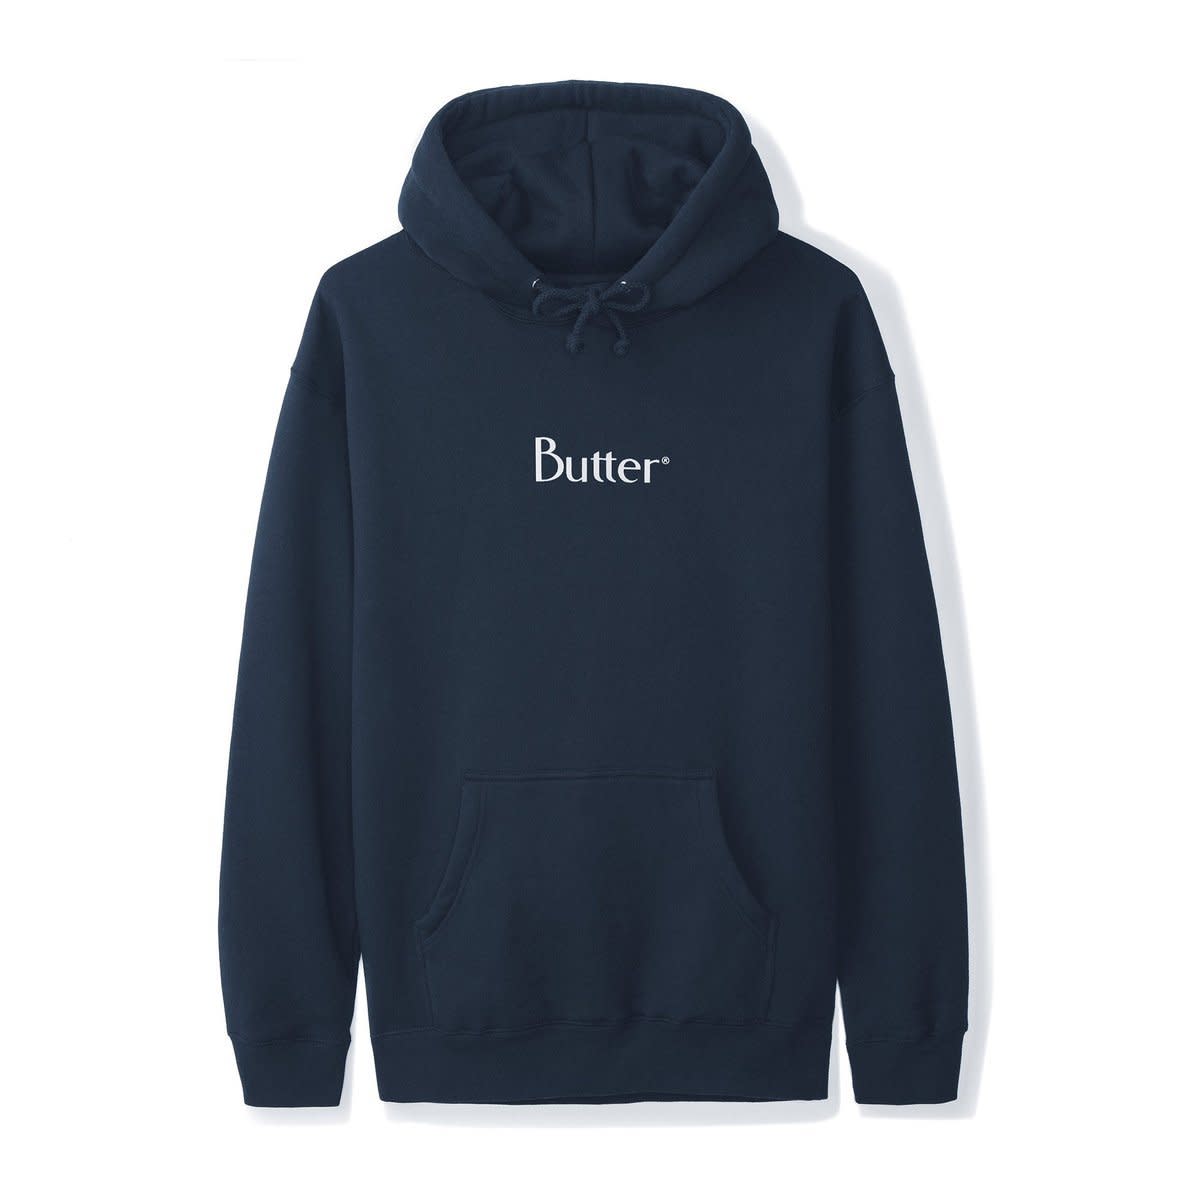 BUTTERGOODS CLASSIC LOGO PULLOVER HOODIE NAVY